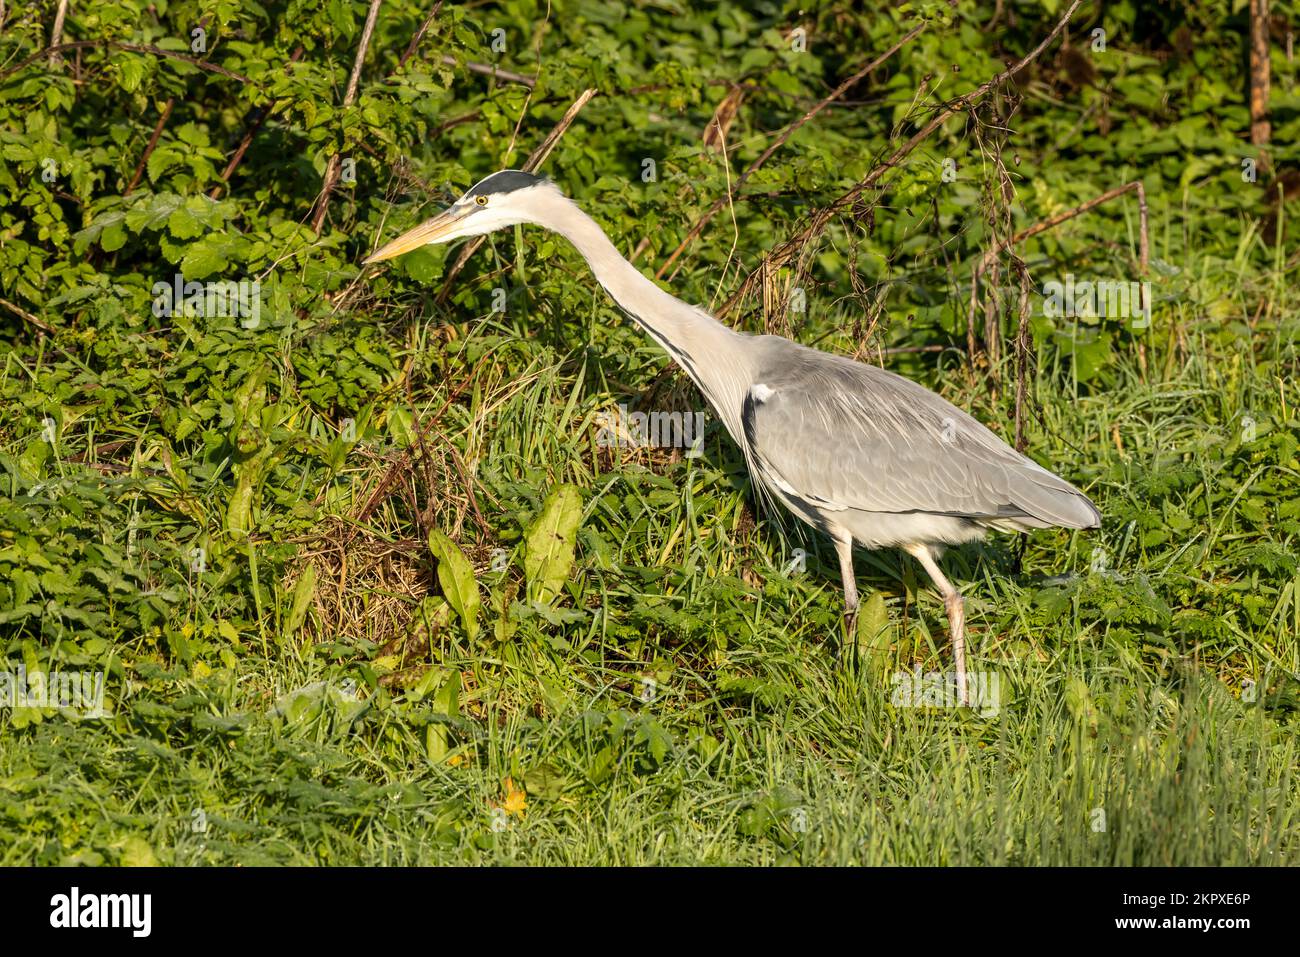 Heron hunting, but not for fish Stock Photo